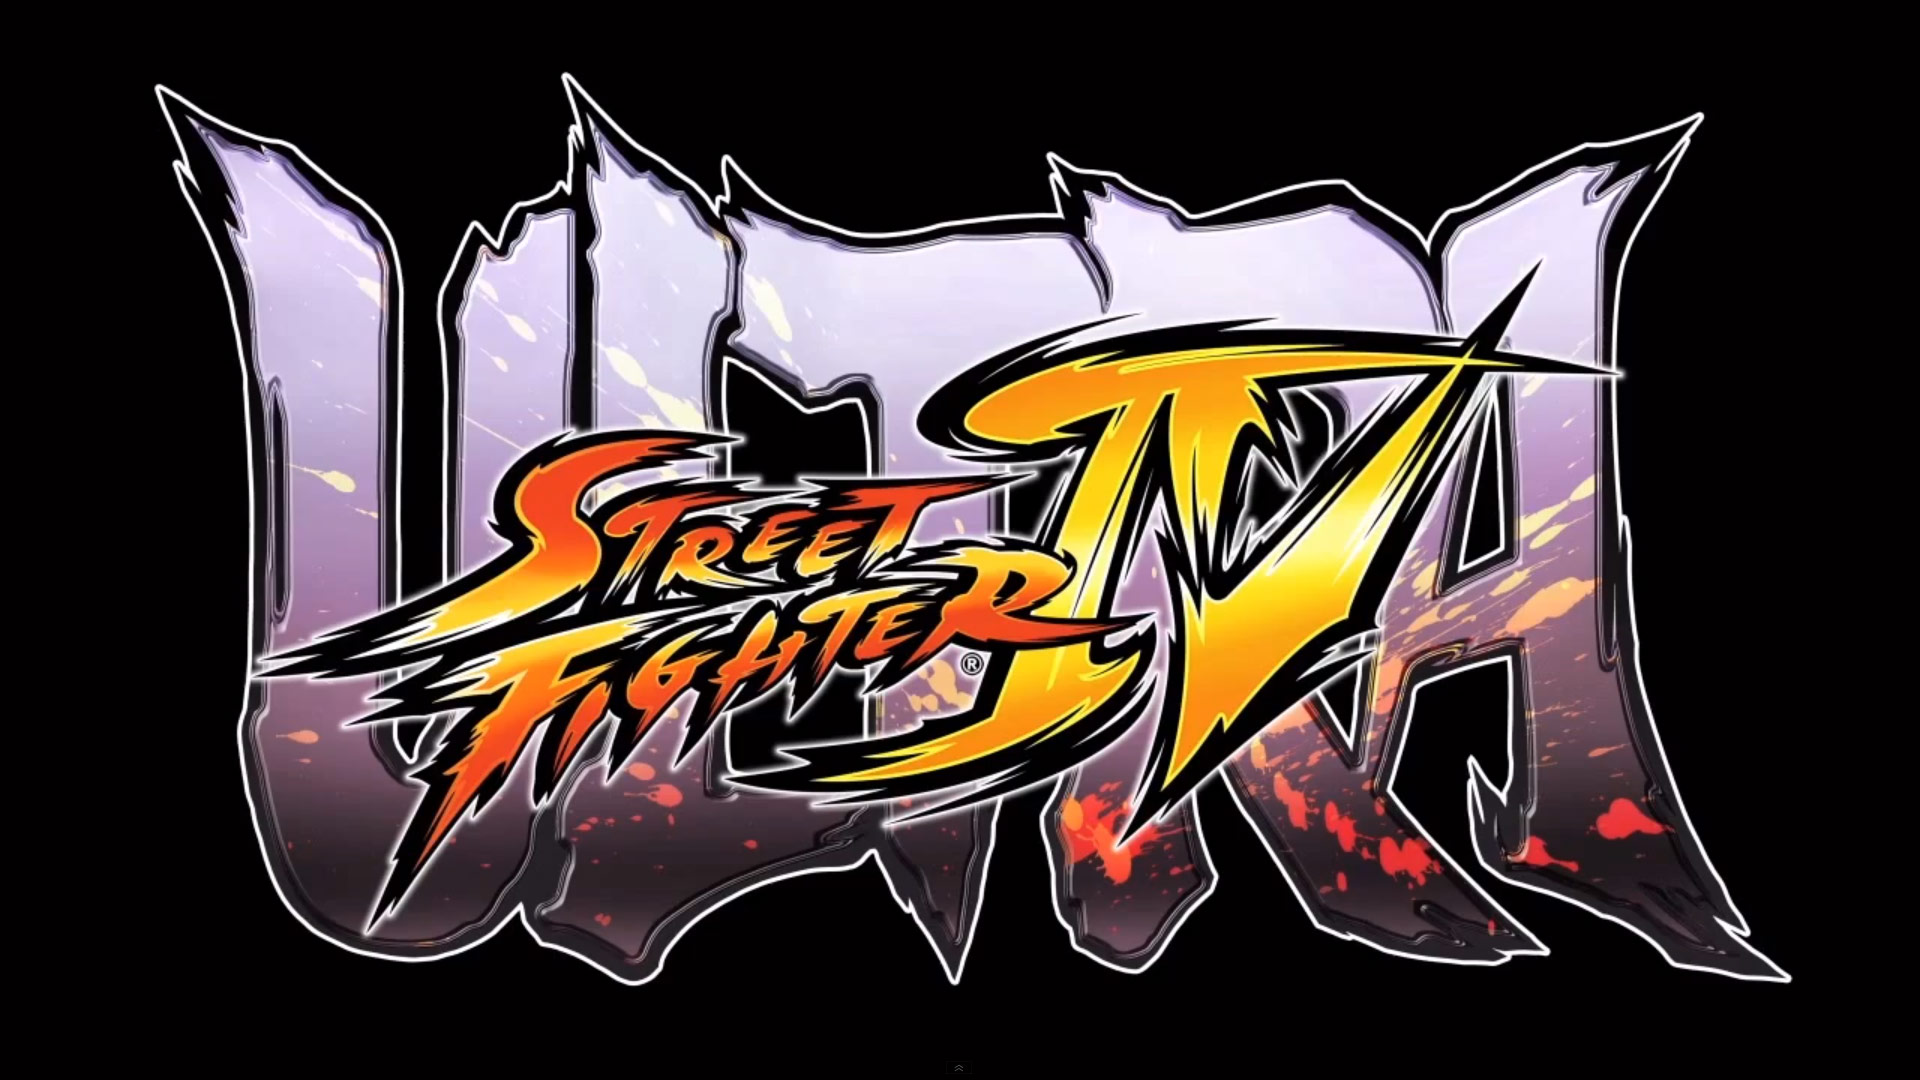 “Ultra Street Fighter IV” - Another Revision to Street Fighter IV, Does It Hold Up?